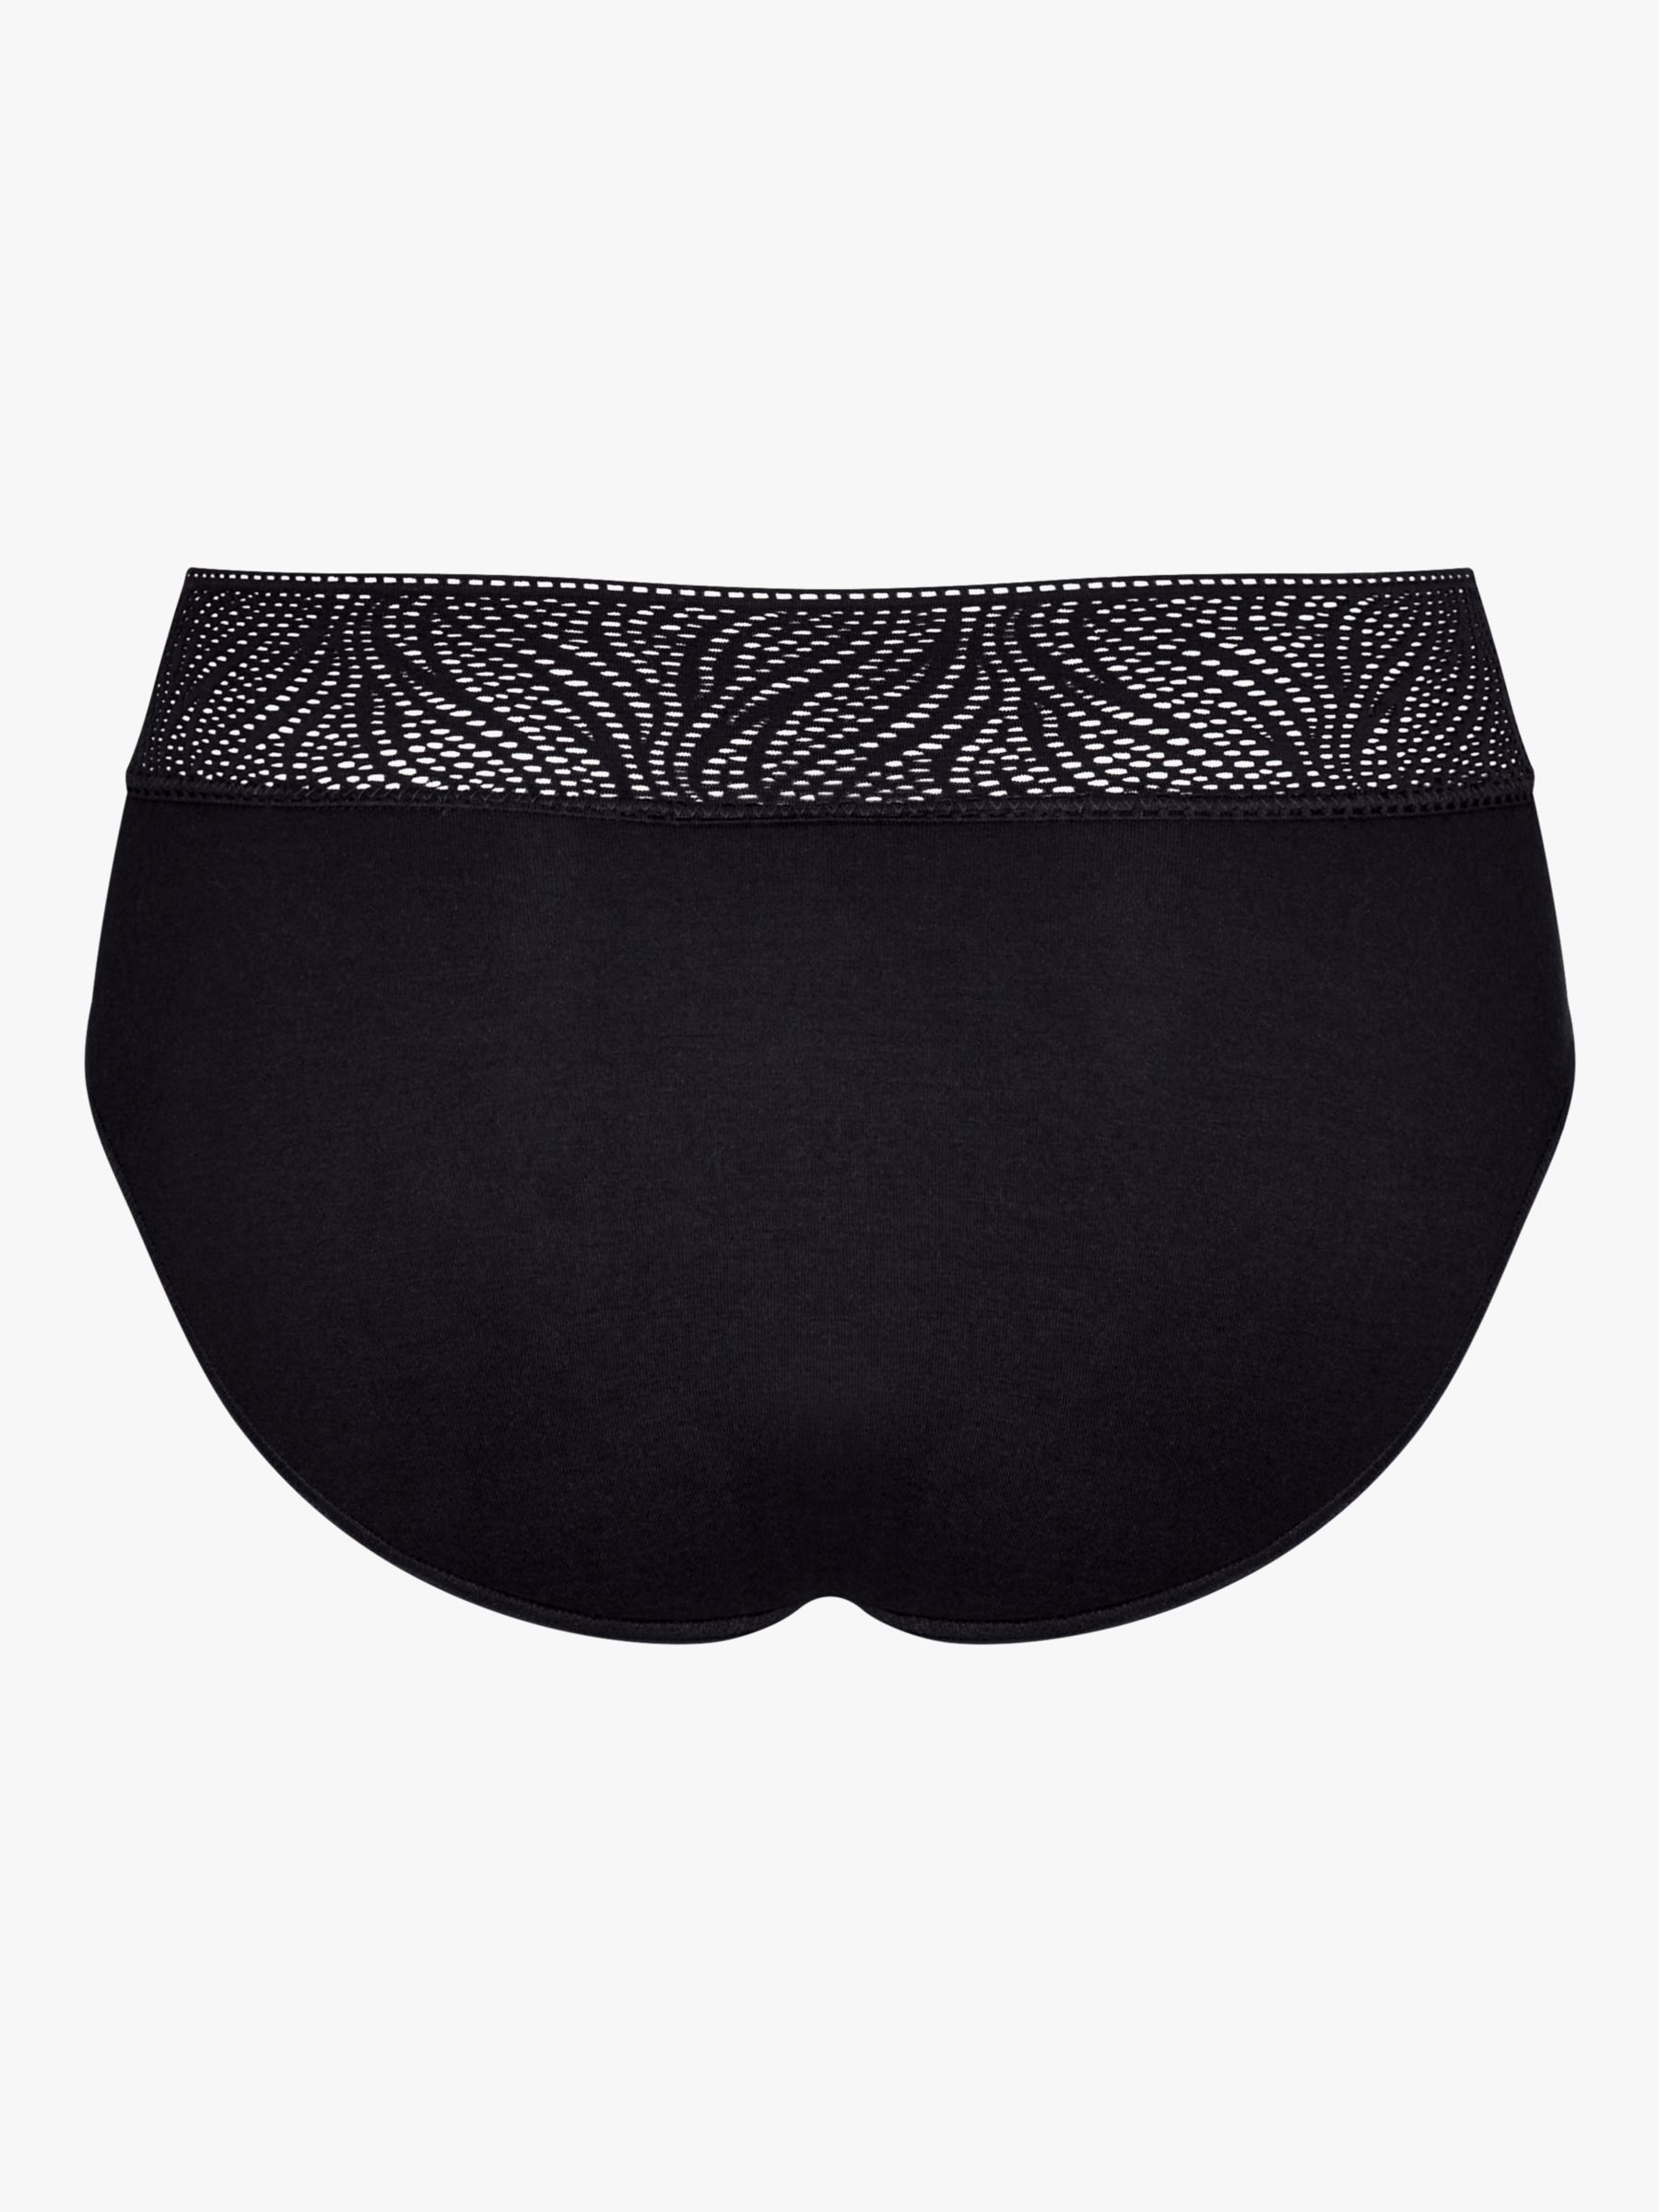 sloggi High Absorbency Hipster Period Knickers, Pack of 2, Black, L